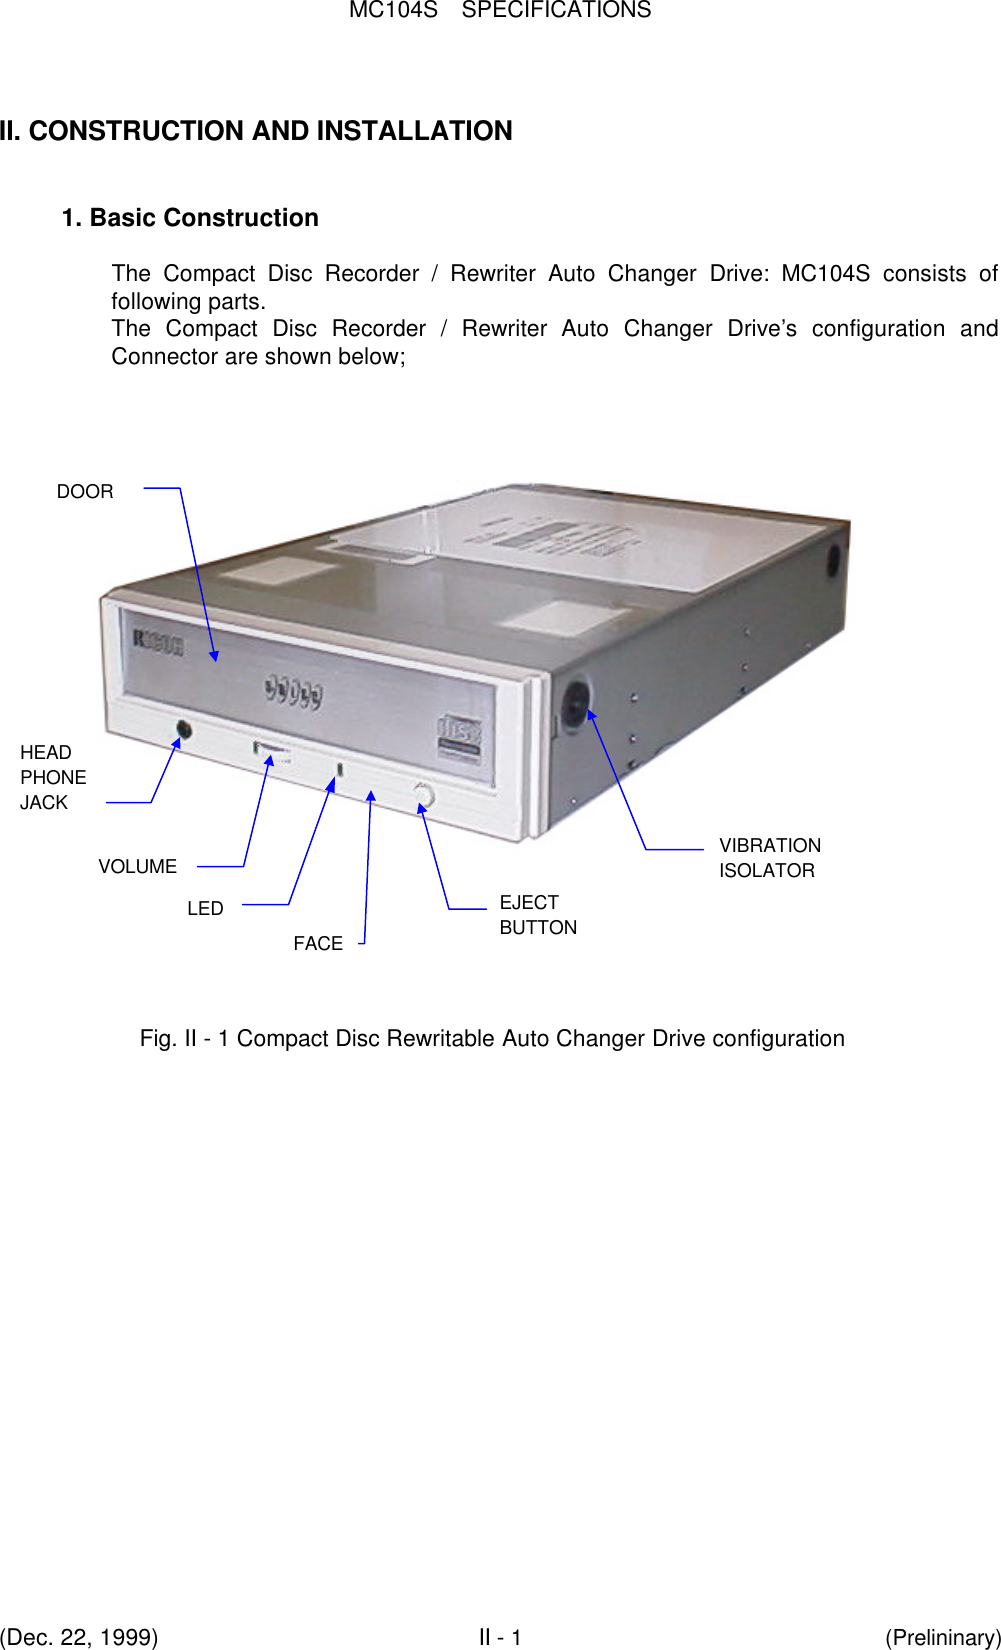 MC104S  SPECIFICATIONS(Dec. 22, 1999)II - 1(Prelininary)II. CONSTRUCTION AND INSTALLATION1. Basic ConstructionThe Compact Disc Recorder / Rewriter Auto Changer Drive:  MC104S consists offollowing parts.The Compact Disc Recorder / Rewriter Auto Changer Drive’s configuration andConnector are shown below; FACEEJECTBUTTONVOLUMEHEADPHONEJACK  LEDVIBRATIONISOLATORDOORFig. II - 1 Compact Disc Rewritable Auto Changer Drive configuration